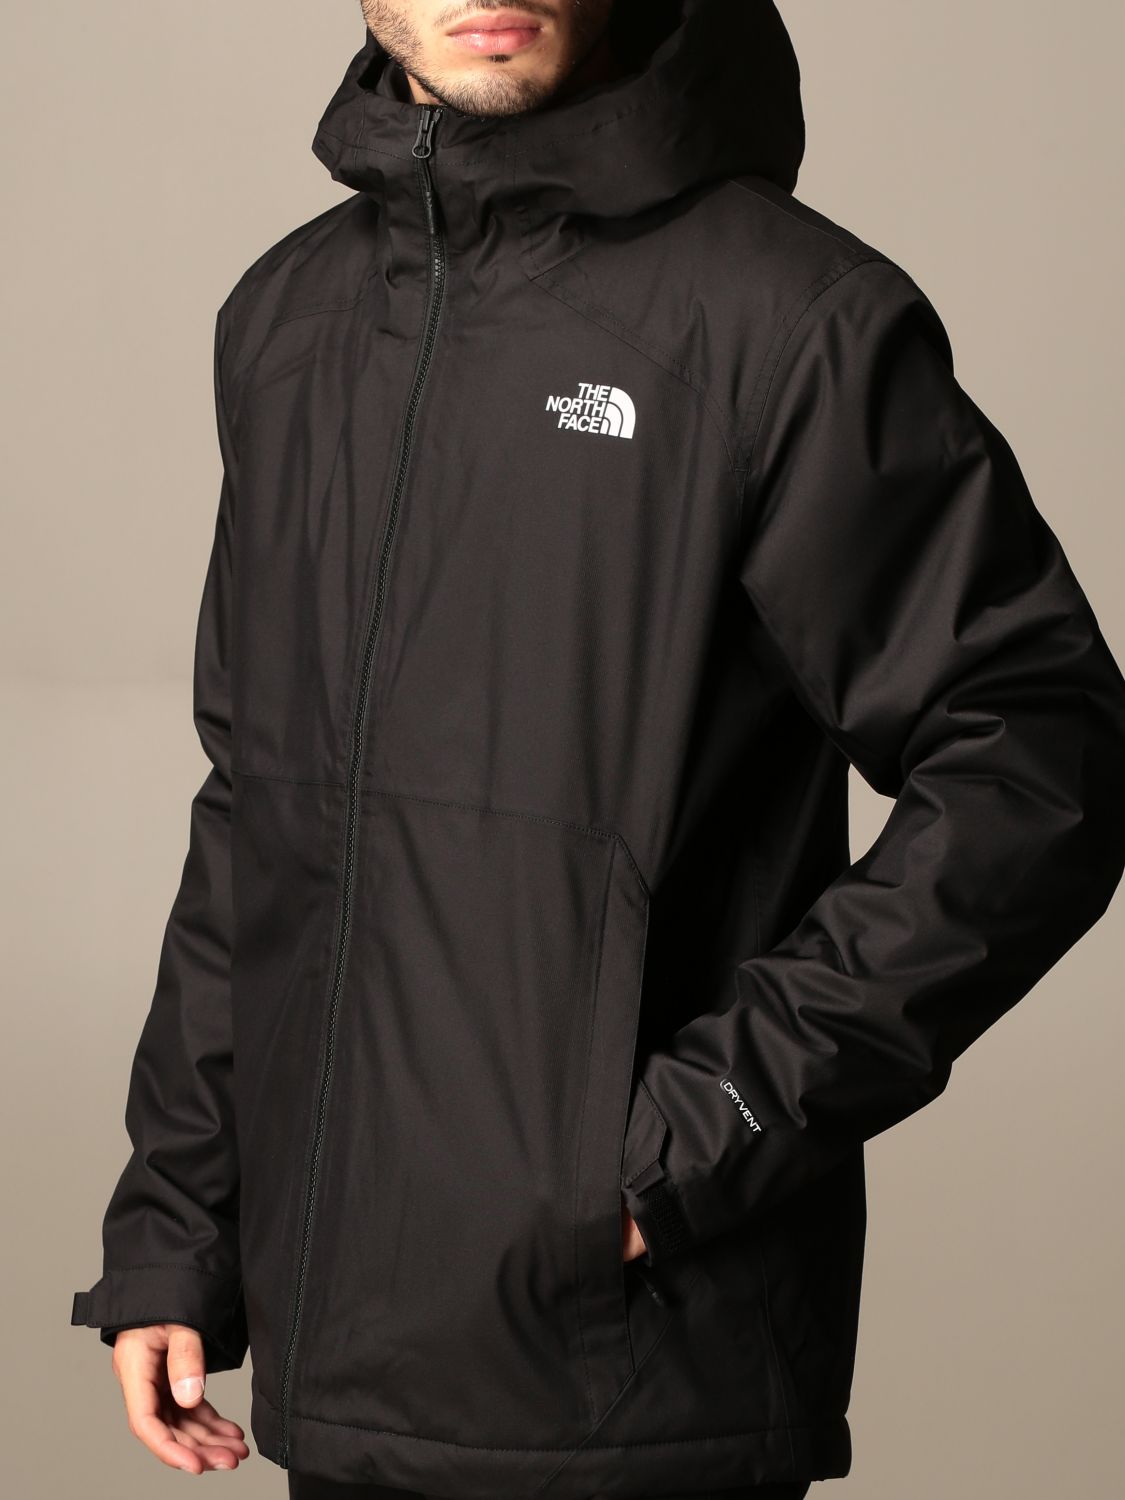 North Face Jacke Sale Herren - The North Face Mens Recycled Zaneck ...